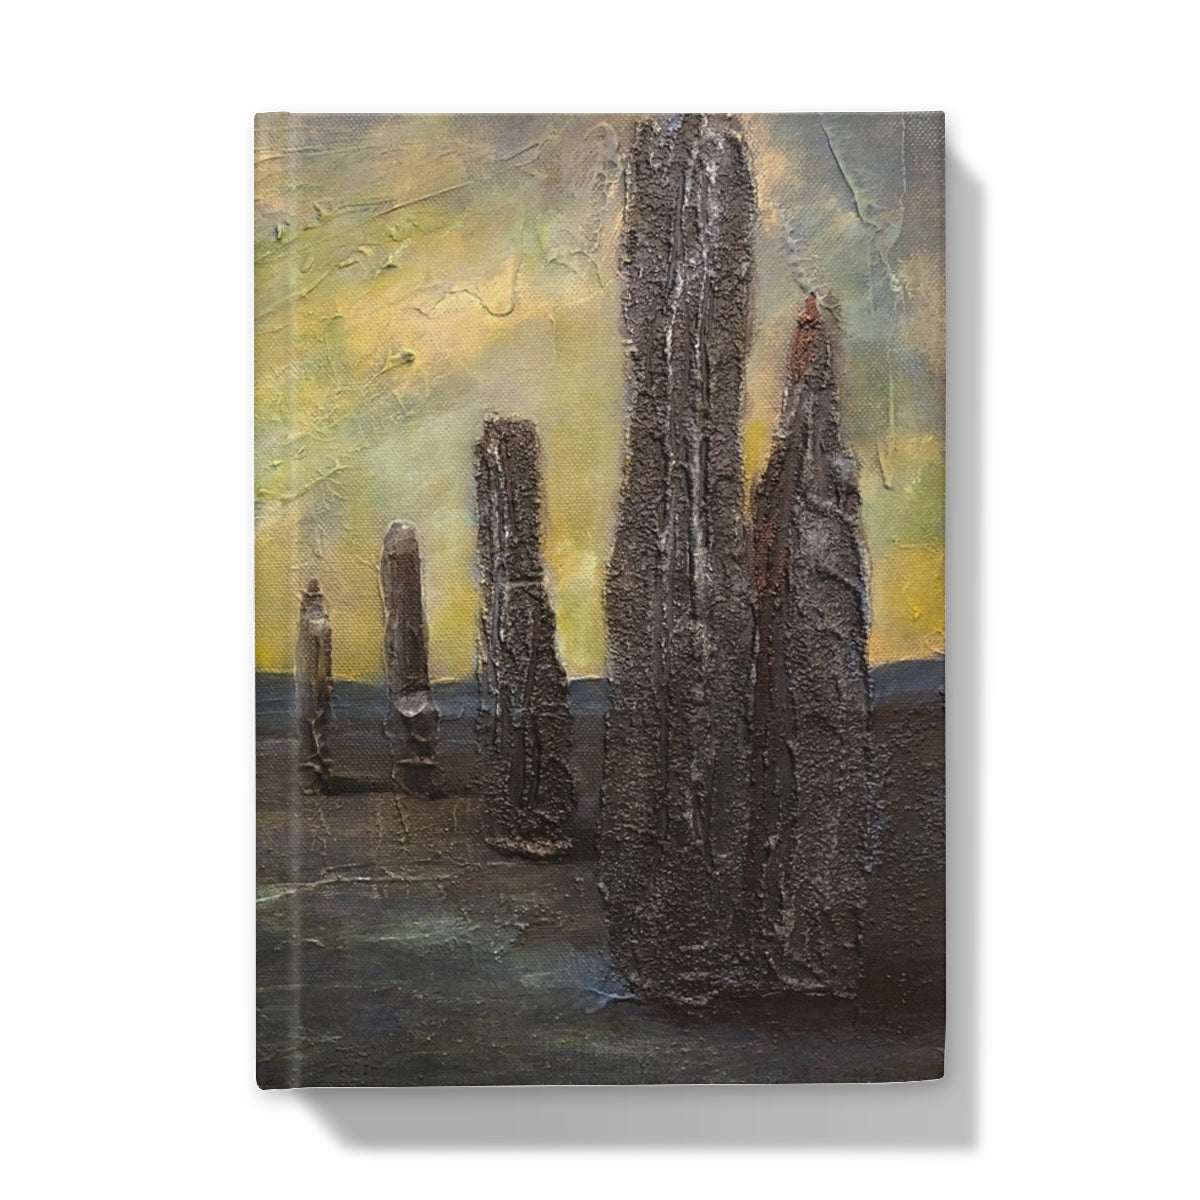 An Ethereal Ring Of Brodgar Art Gifts Hardback Journal-Journals & Notebooks-Orkney Art Gallery-A4-Plain-Paintings, Prints, Homeware, Art Gifts From Scotland By Scottish Artist Kevin Hunter